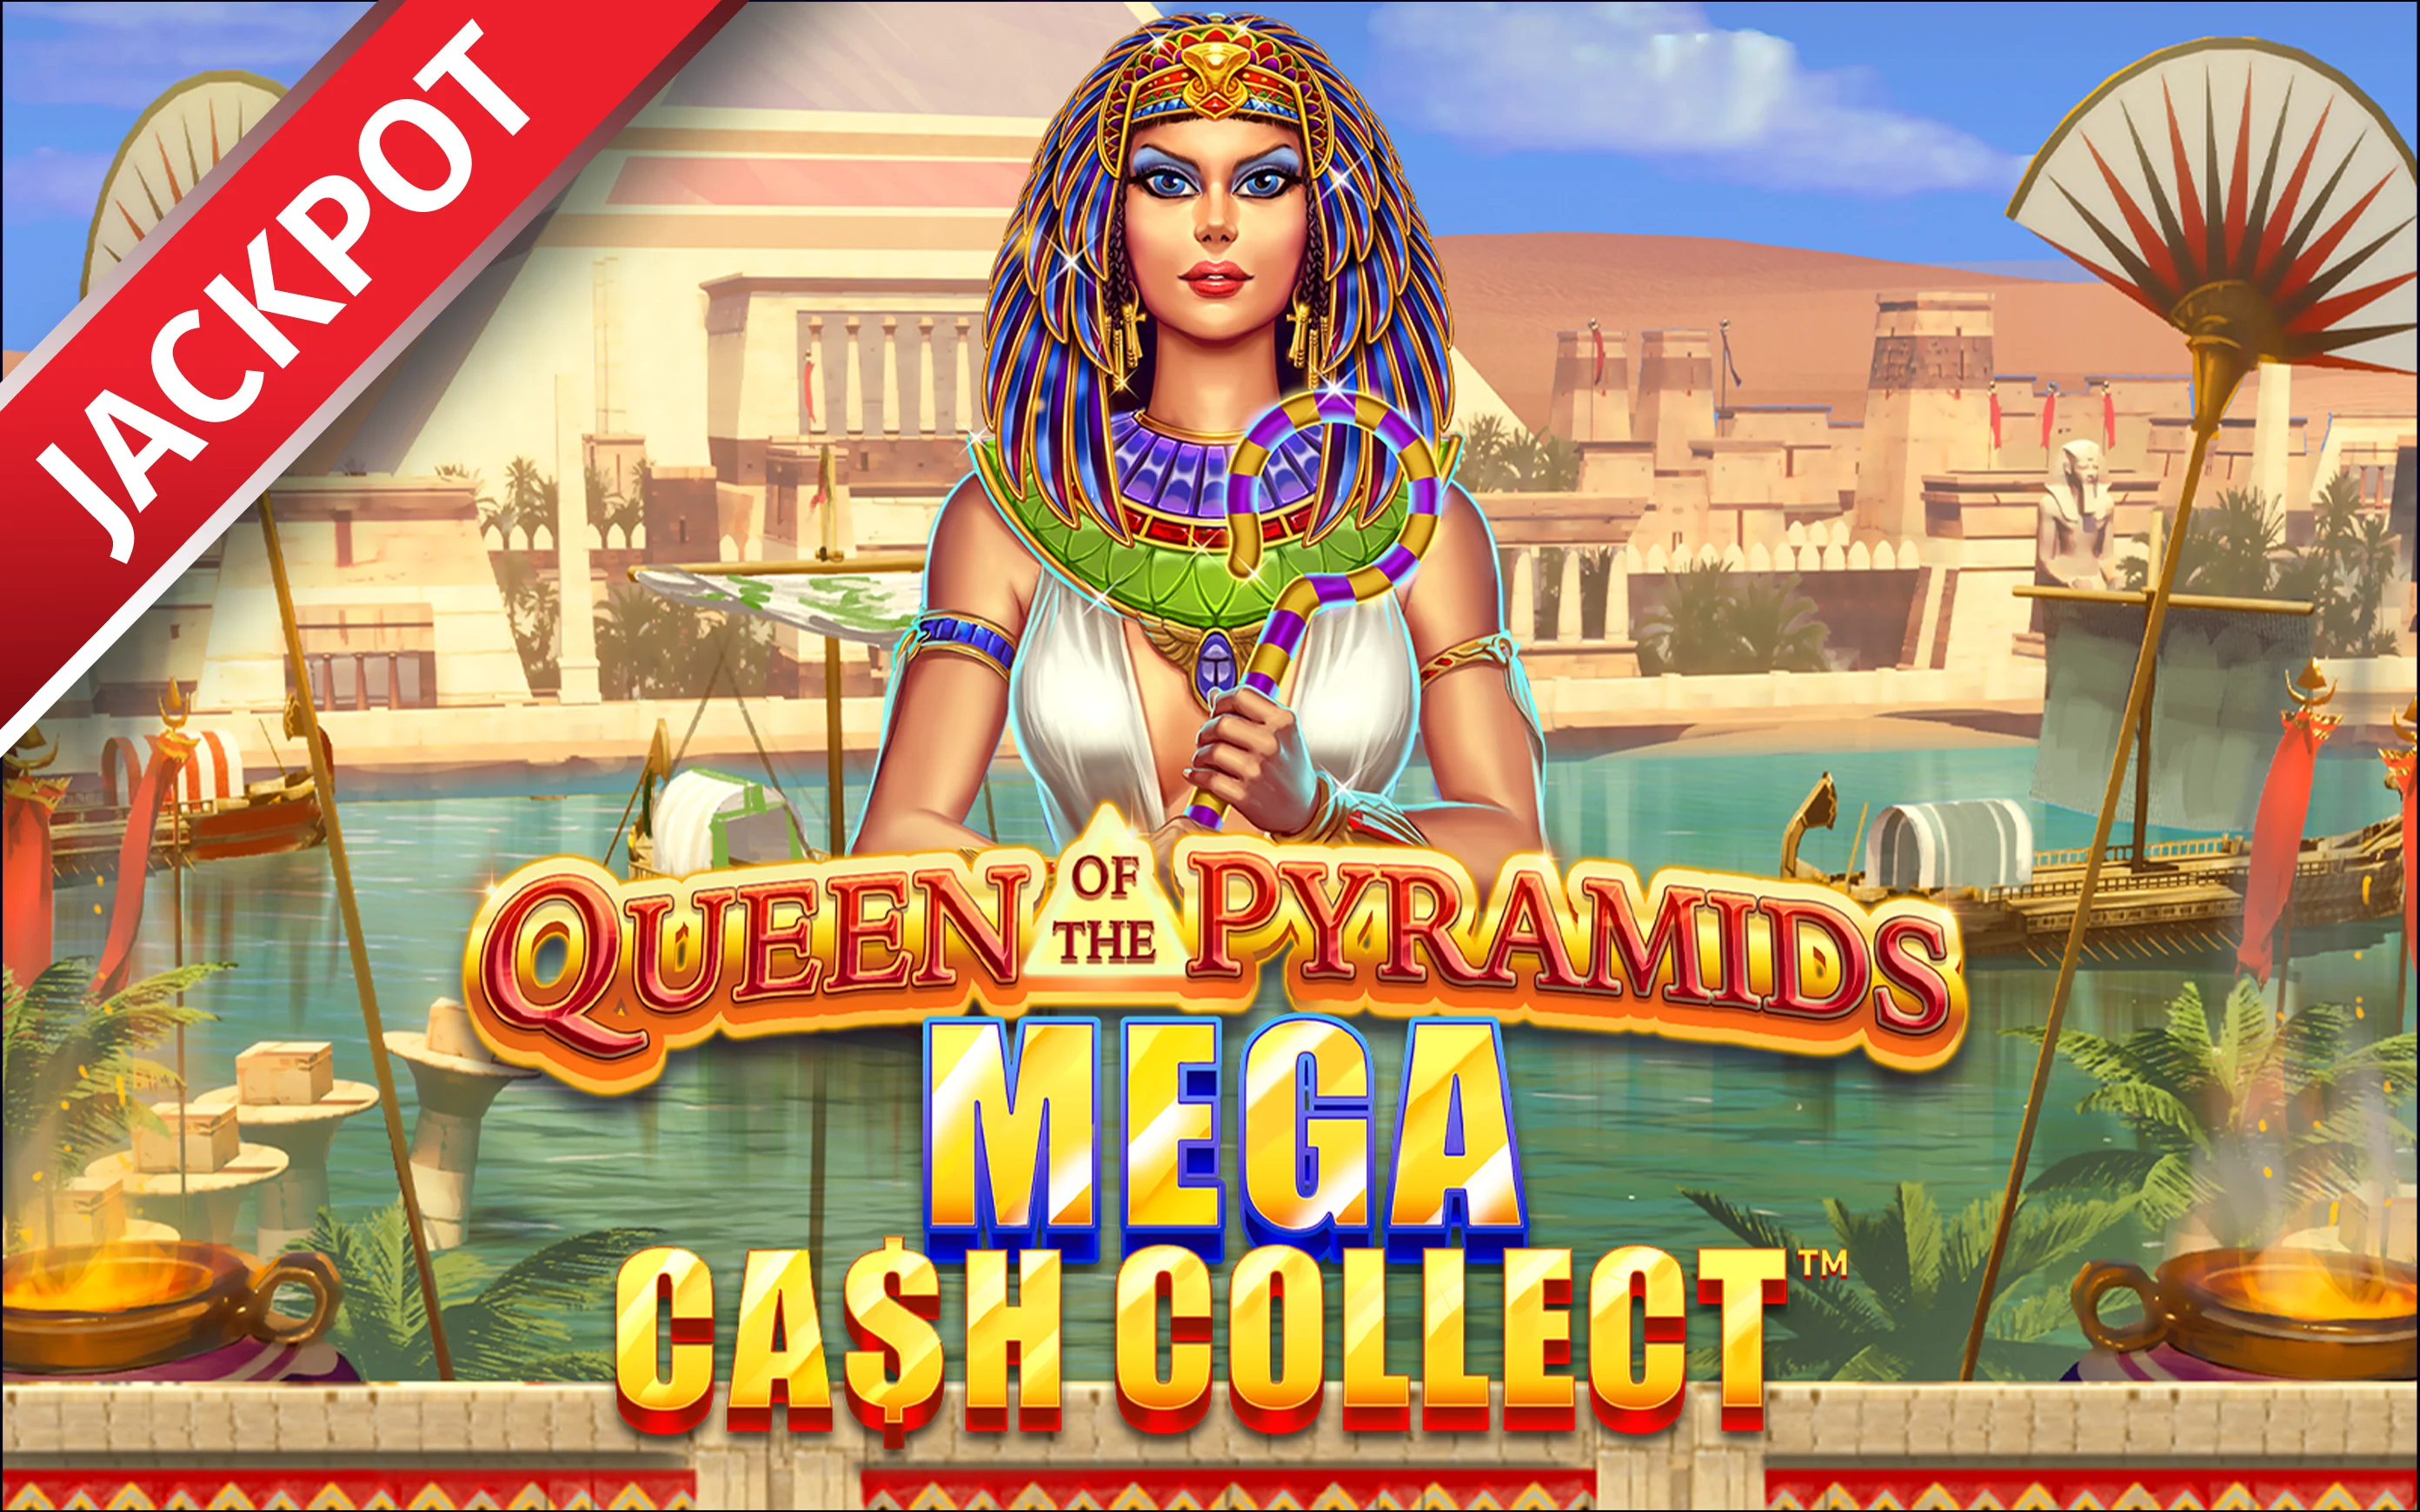 Spil Queen of the Pyramids: Mega Cash Collect™ på Starcasino.be online kasino
